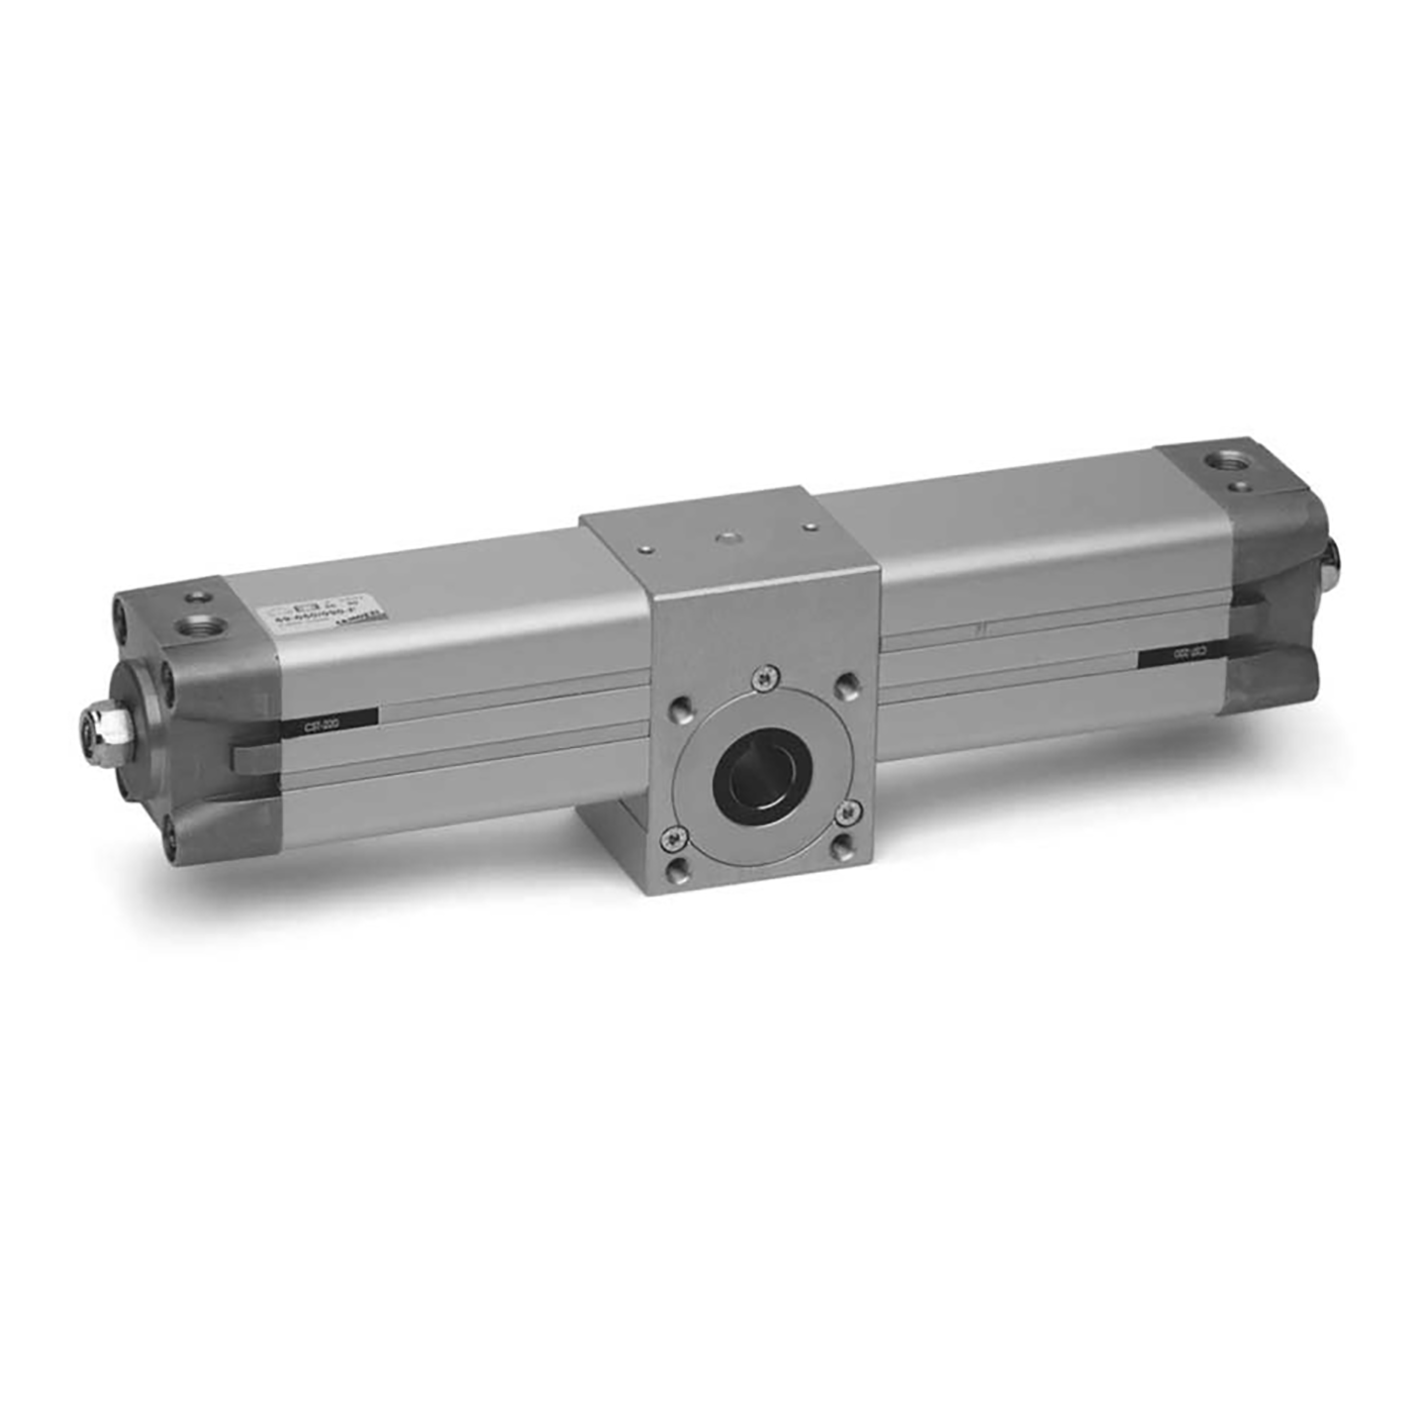 1/2" BSP Parallel Female Ports Series 69 Double Acting Rotary Cylinder